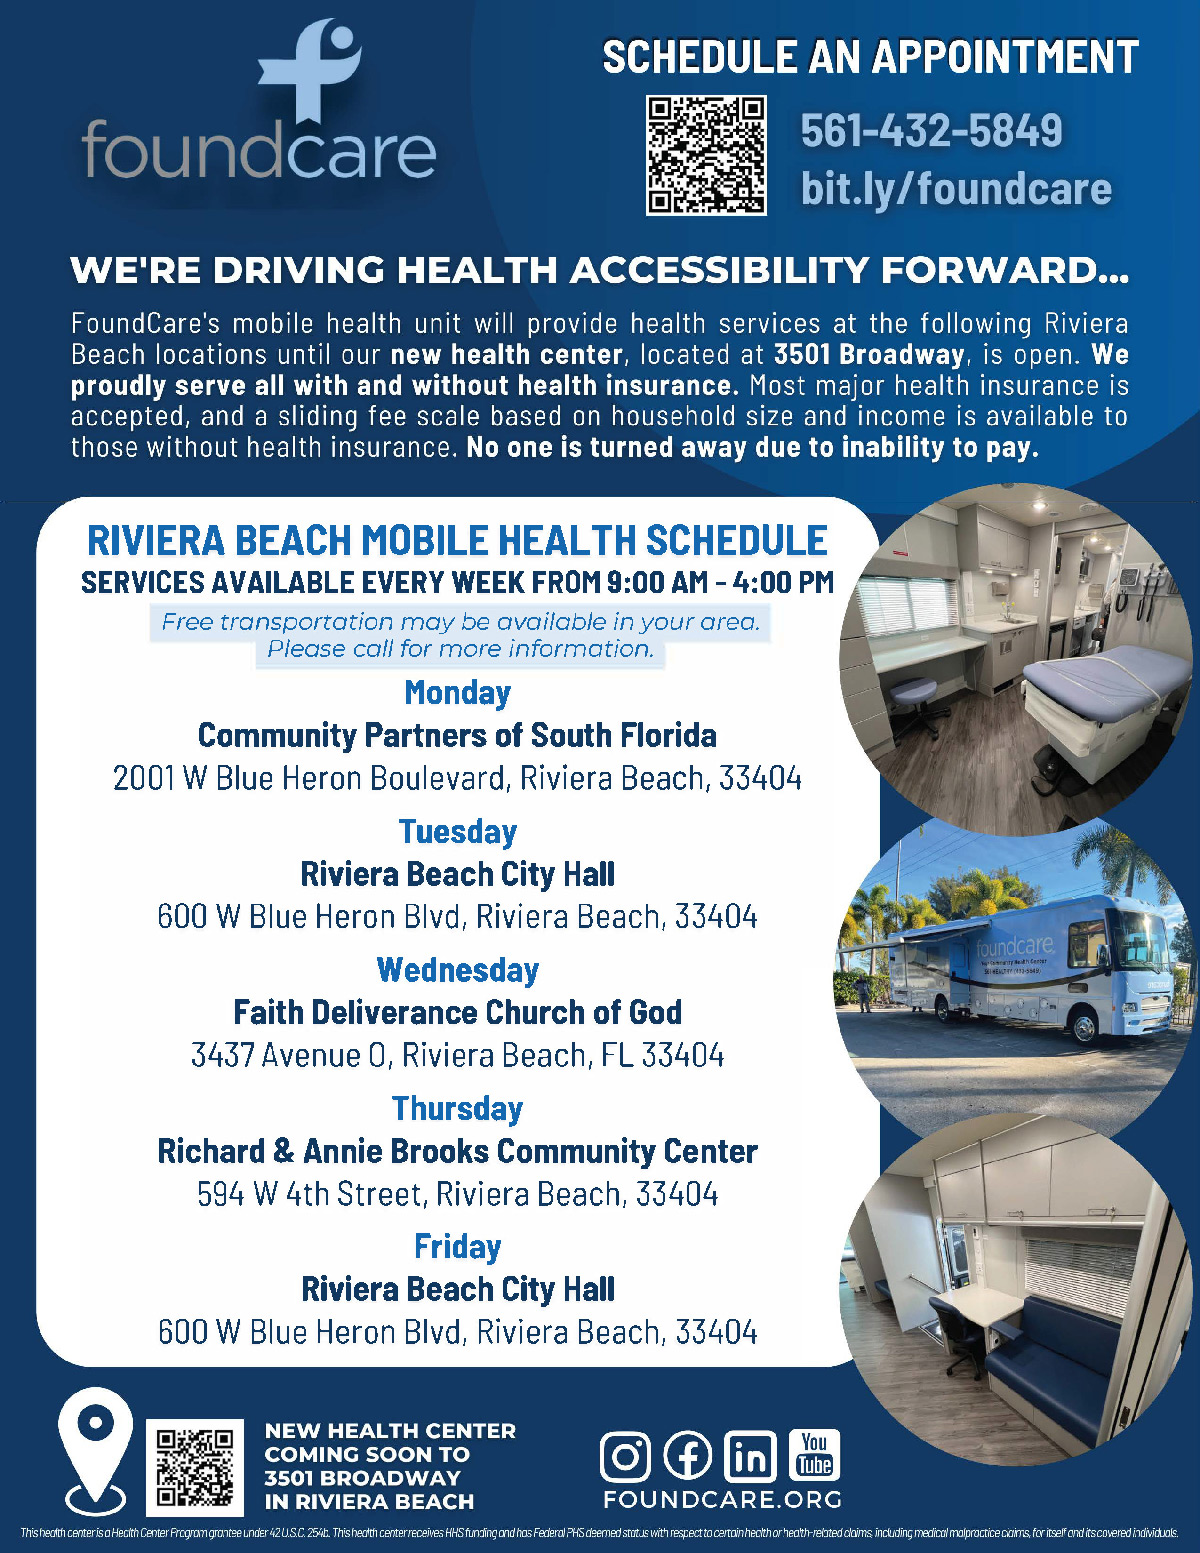 WE'RE DRIVING HEALTH ACCESSIBILITY FORWARD... FoundCare's mobile health unit will provide health services at the following Riviera Beach locations until our new health center, located at 3501 Broadway, is open. We proudly serve all with and without health insurance. Most major health insurance is accepted, and a sliding fee scale based on household size and income is available to those without health insurance. No one is turned away due to inability to pay. RIVIERA BEACH MOBILE HEALTH SCHEDULE SERVICES AVAILABLE EVERY WEEK FROM 9:00 AM - 4:00 PM Free transportation may be available in your area. Please call for more information. Monday Community Partners of South Florida 2001W Blue Heron Boulevard, Riviera Beach, 33404 Tuesday Riviera Beach City Hall 600 W Blue Heron Blvd, Riviera Beach, 33404 Wednesday Faith Deliverance Church of God 3437 Avenue 0, Riviera Beach, FL 33404 Thursday Richard & Annie Brooks Community Center 594 W 4th Street, Riviera Beach, 33404 Friday Riviera Beach City Hall 600 W Blue Heron Blvd, Riviera Beach, 33404